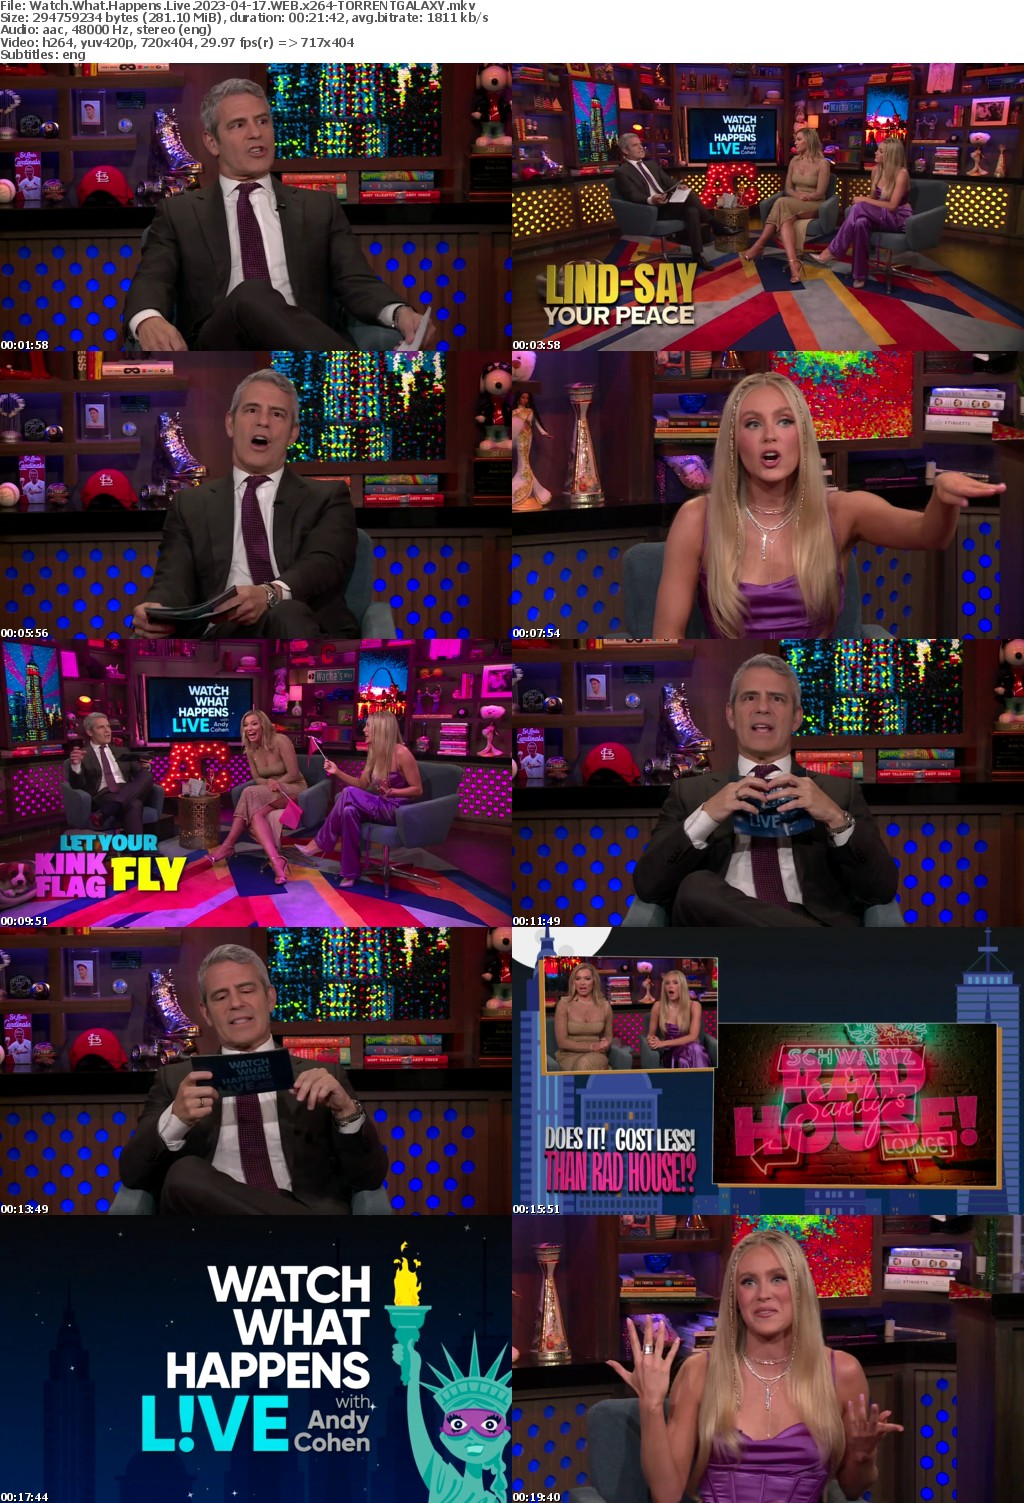 Watch What Happens Live 2023-04-17 WEB x264-GALAXY